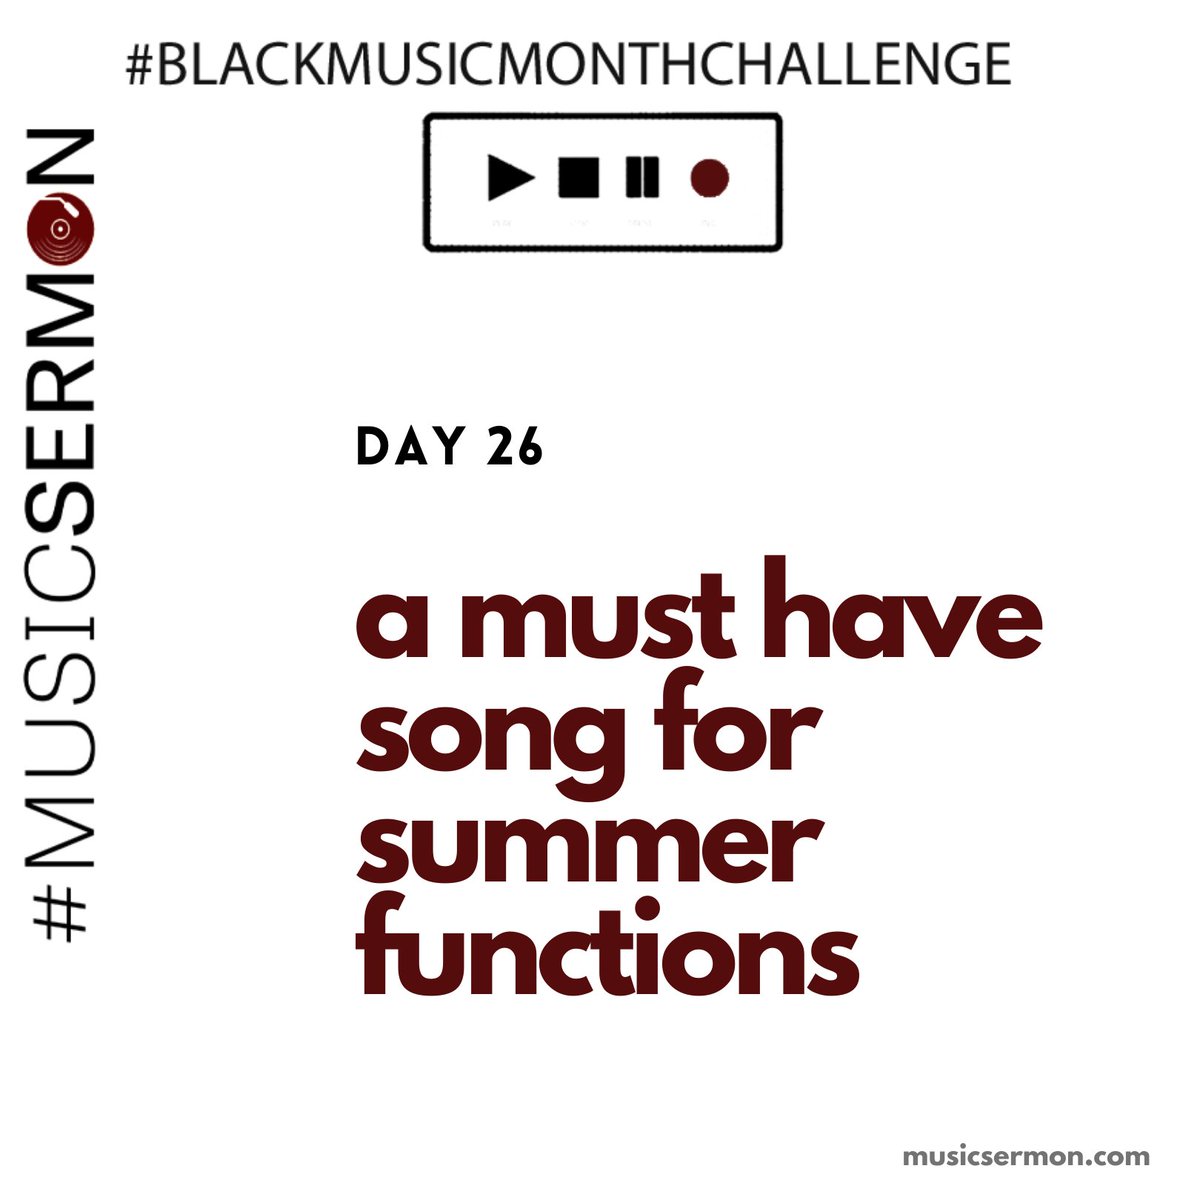 We're coming into the last few days of the  #BlackMusicMonthChallenge!! As most of us have accepted that the WHOLE Summer '20 is canceled, I ask you to think back fondly on "outside" days, and, for Day 26, share a must have song for summer functions.